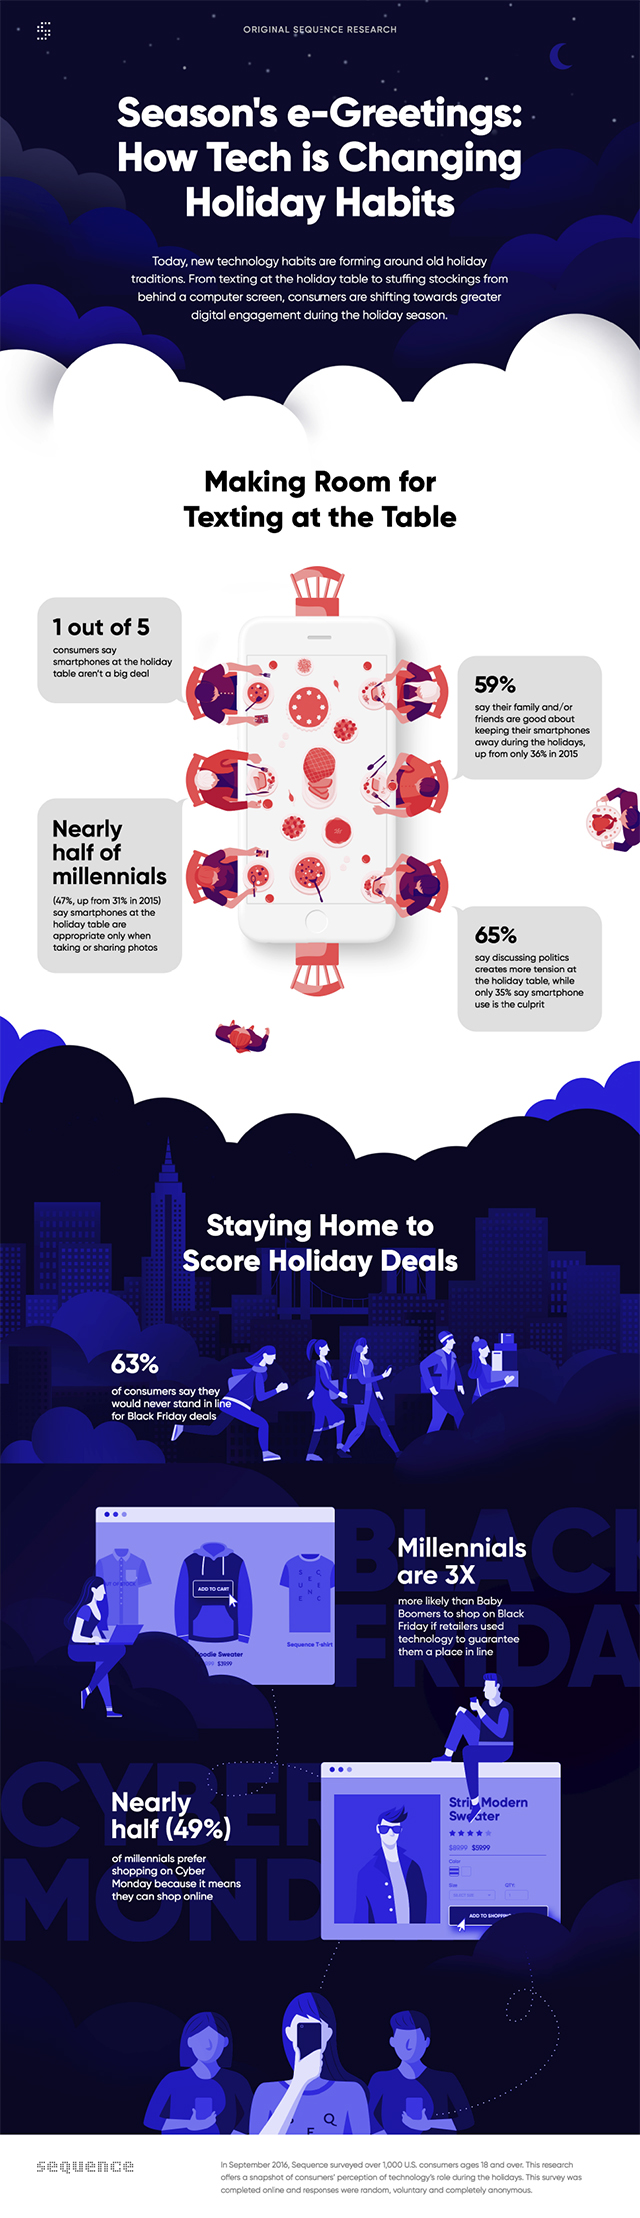 Holiday Infographic 11012016.jpg